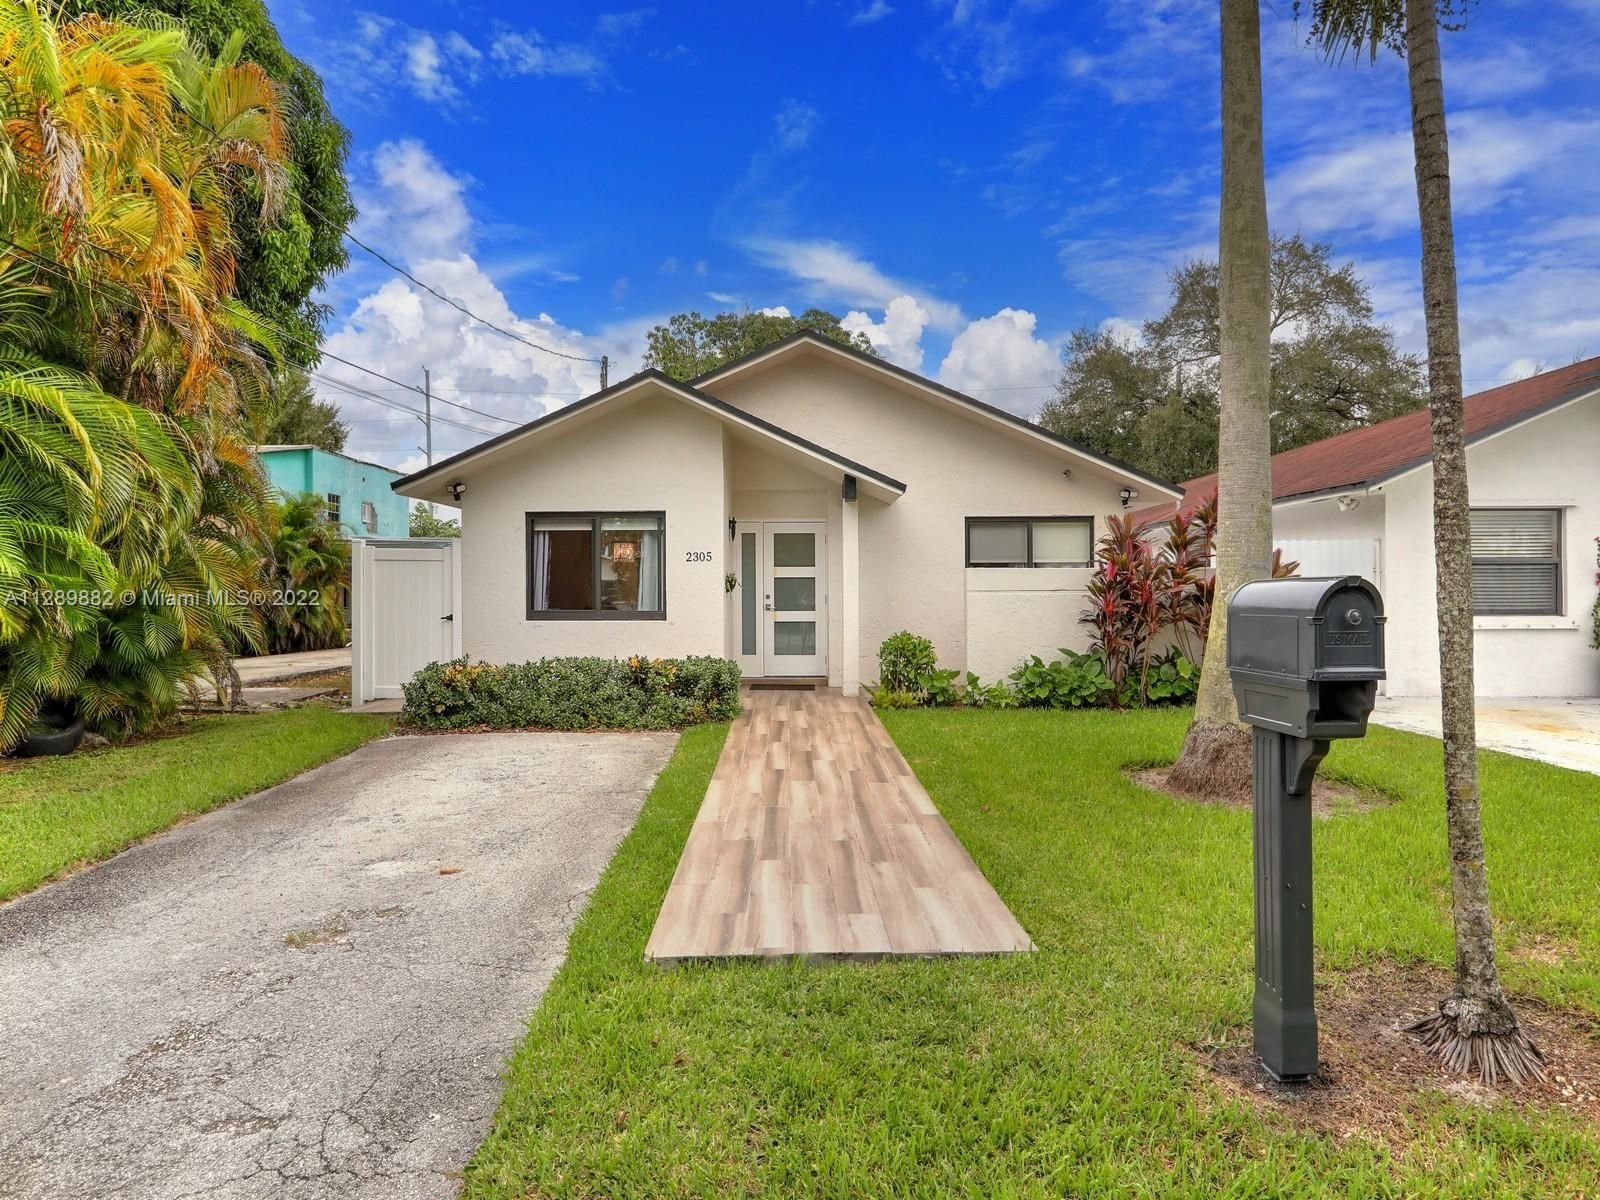 Real estate property located at 2305 62nd Ct, Miami-Dade County, Miami, FL